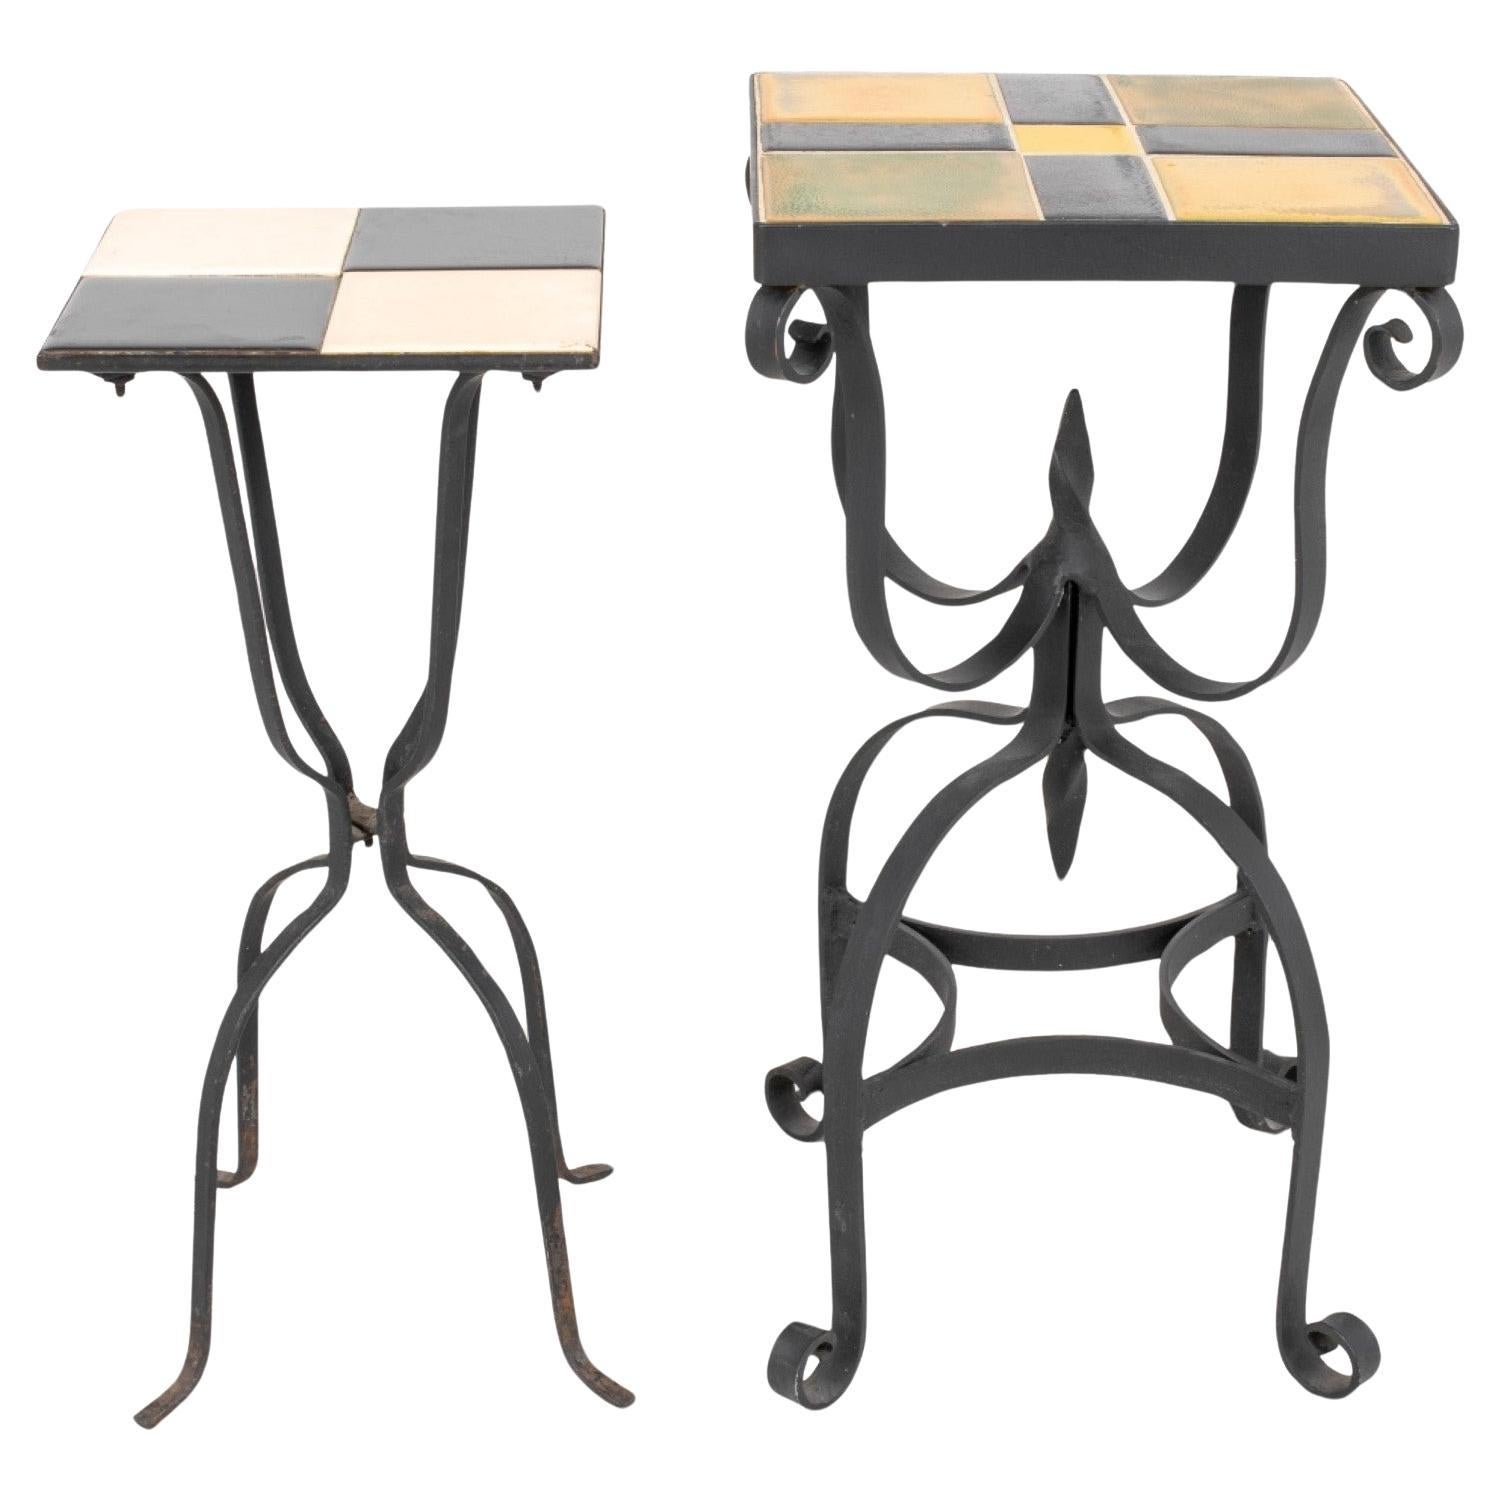 Ceramic Tile Top Iron Side Tables, 2 For Sale